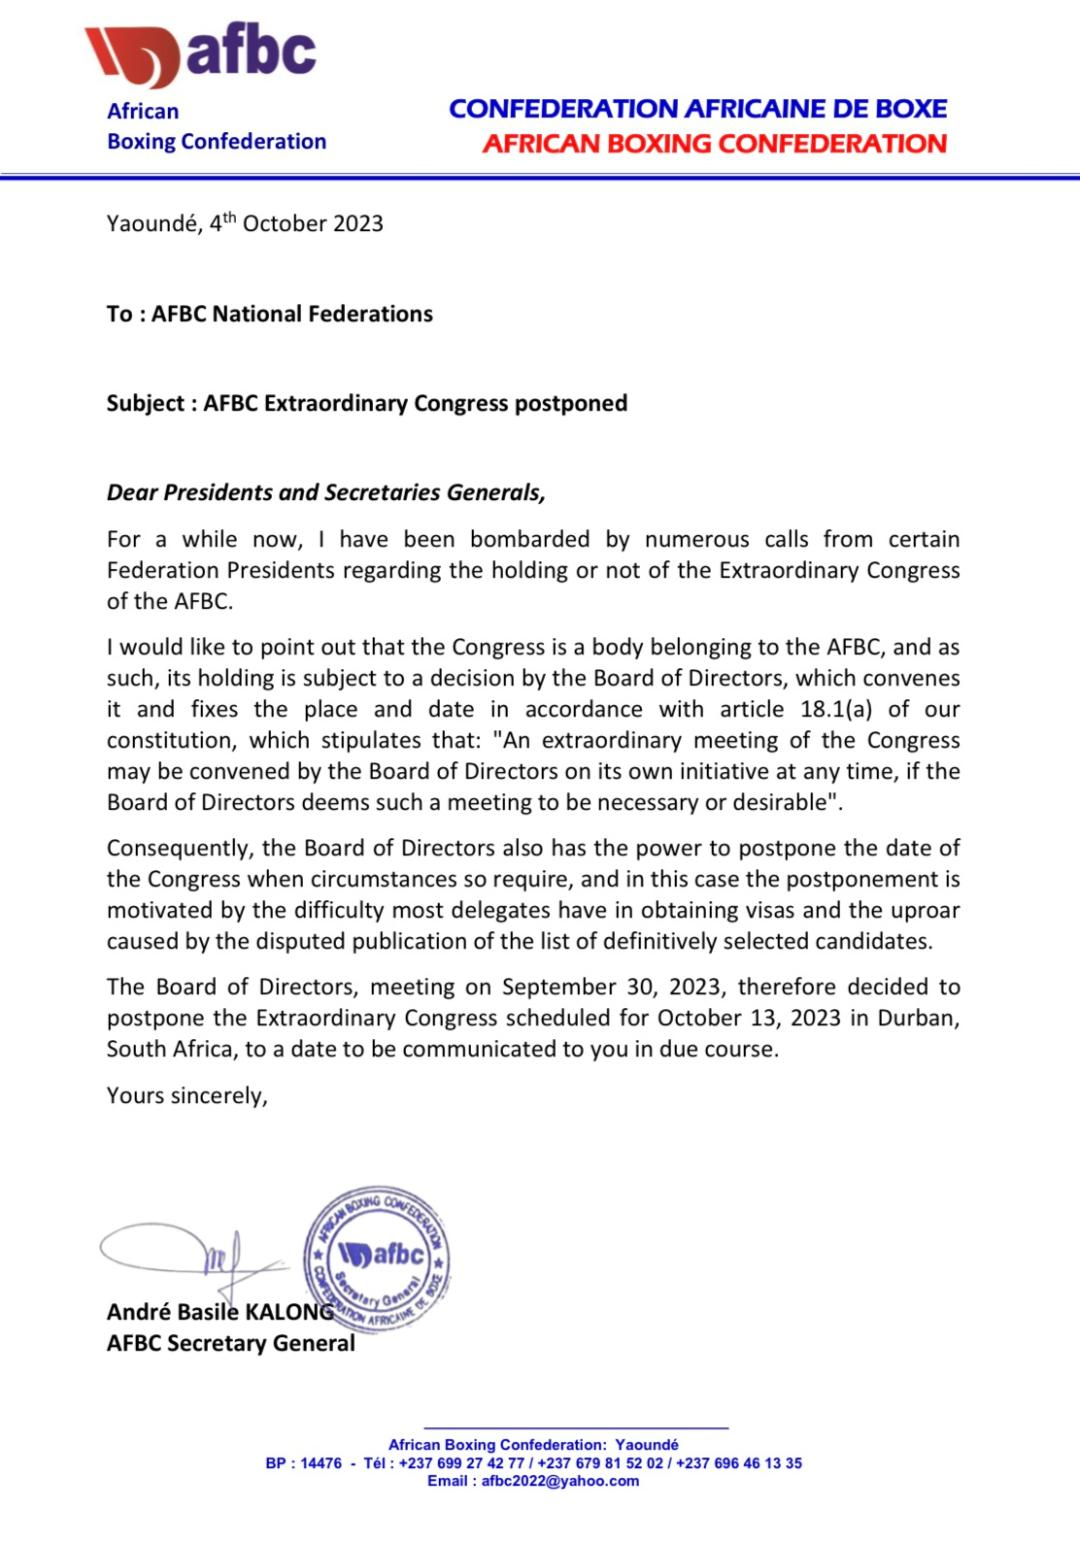 A letter was sent today by the African Boxing Confederation to its Member Federations telling them that the meeting to elect a new President on October 13 in Durban has been postponed ©ITG